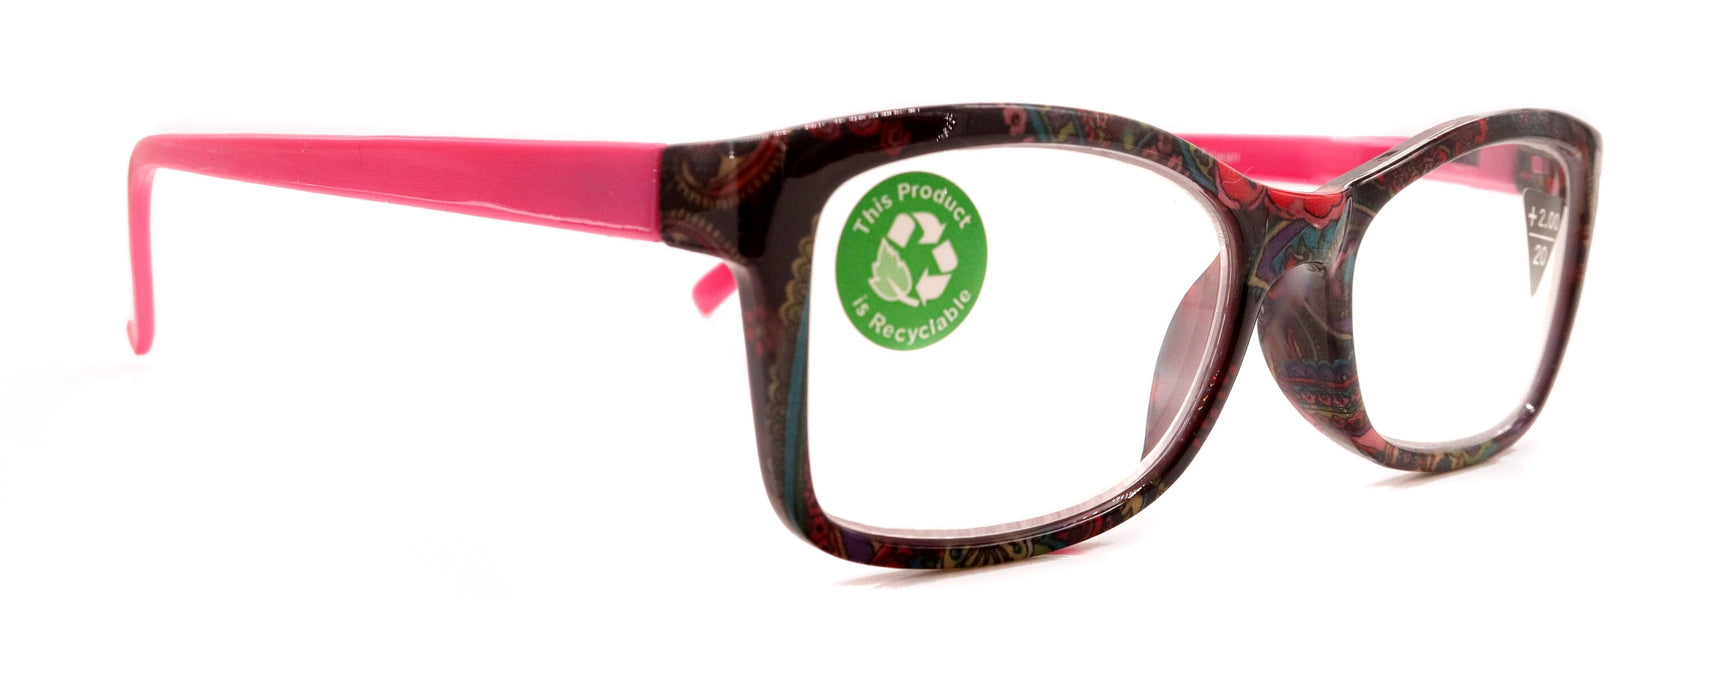 Frida, (Premium) Reading Glasses, High End Readers +1.25 .. +3 Magnifying Eyeglasses, Square Optical Frame. (Pink) Paisley. NY Fifth Avenue